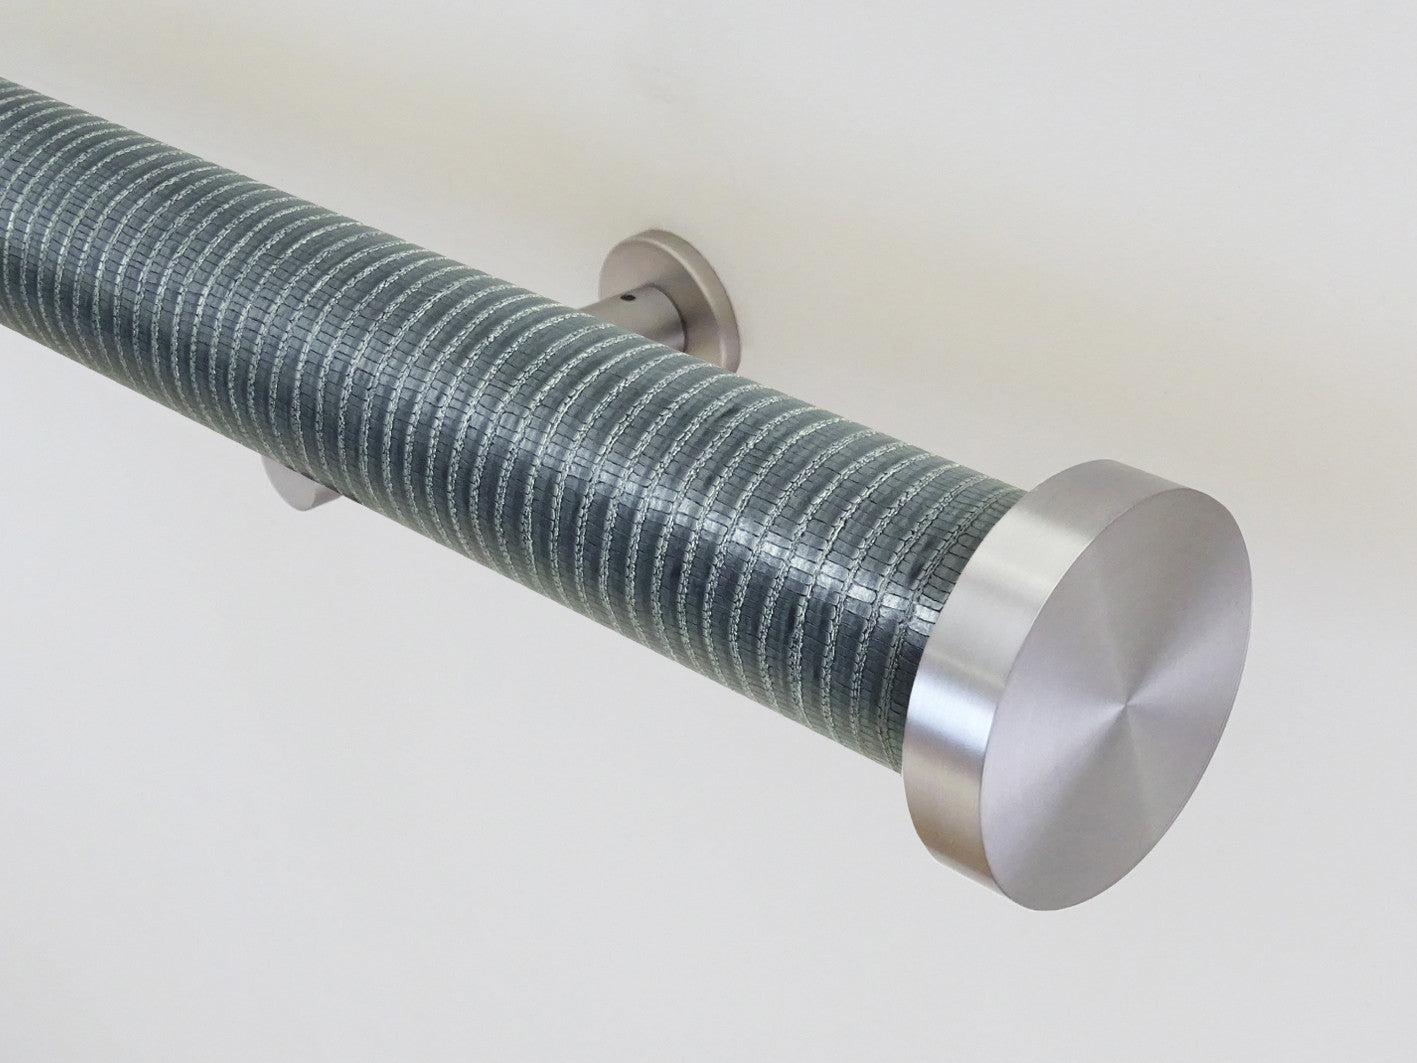 "Zinc" metallic textured 50mm tracked curtain pole by Walcot House